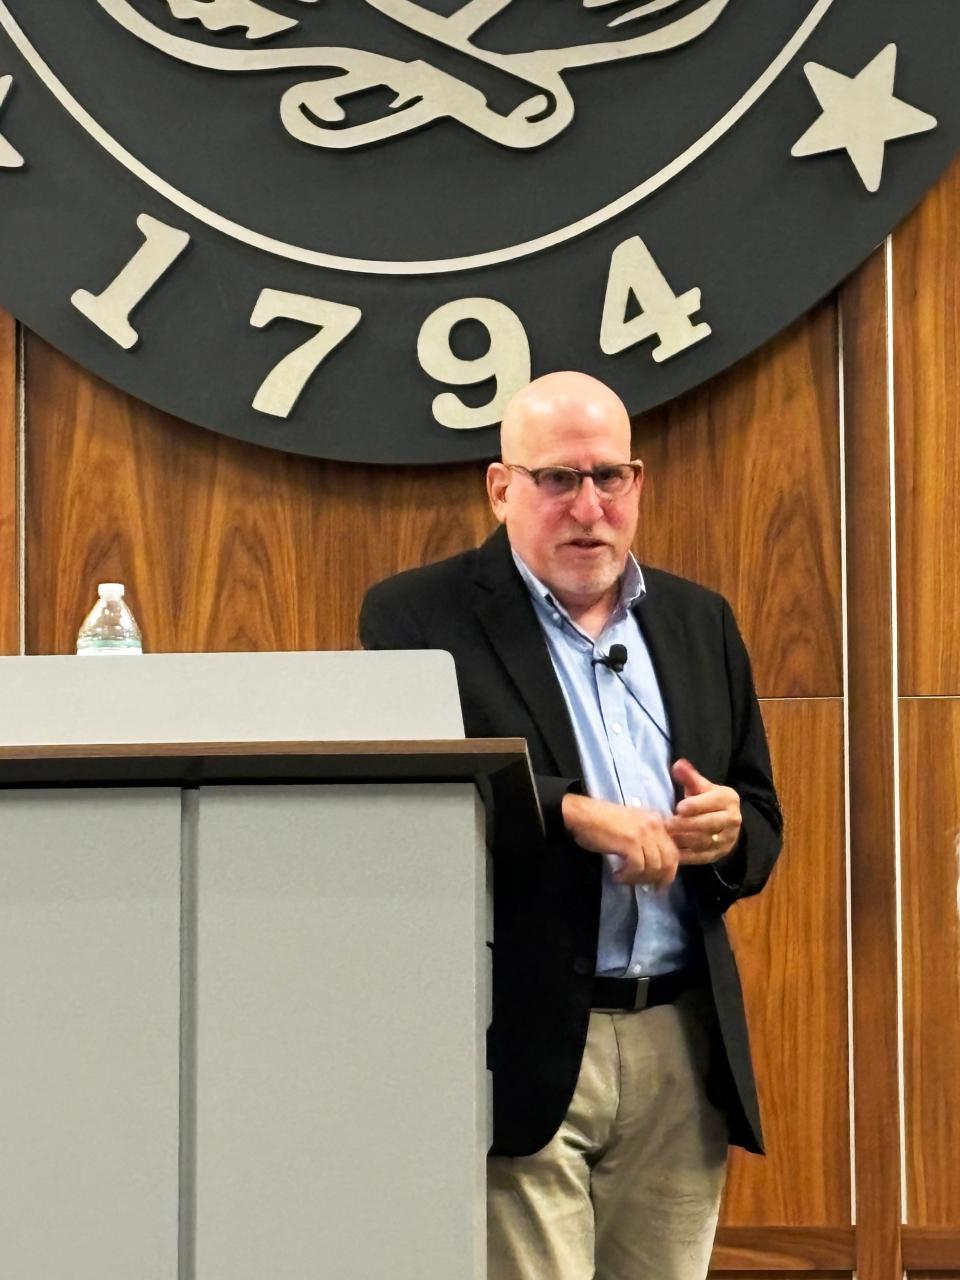 Rob Stein, an award-winning NPR science reporter, delivers the Alfred and Julia Hill Lecture Series on Science, Society and the Mass Media. It was established in 1989 by the late Tom Hill, former publisher of The Oak Ridger, and his sister in memory of their parents.